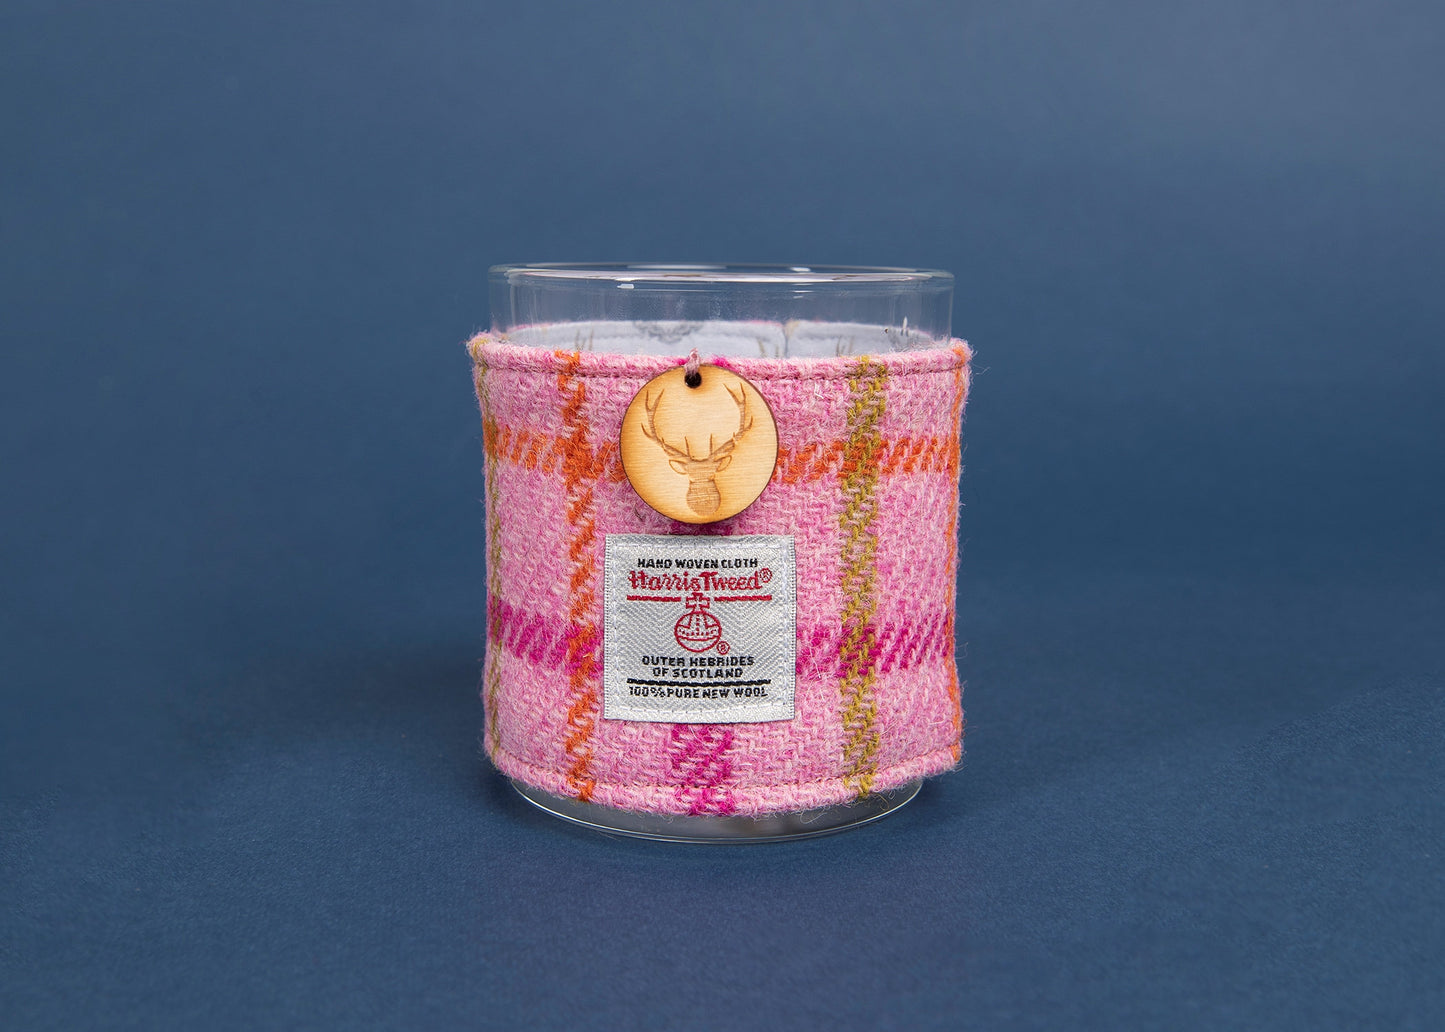 Pear & Freesia Soy Candle with Harris Tweed Sleeve